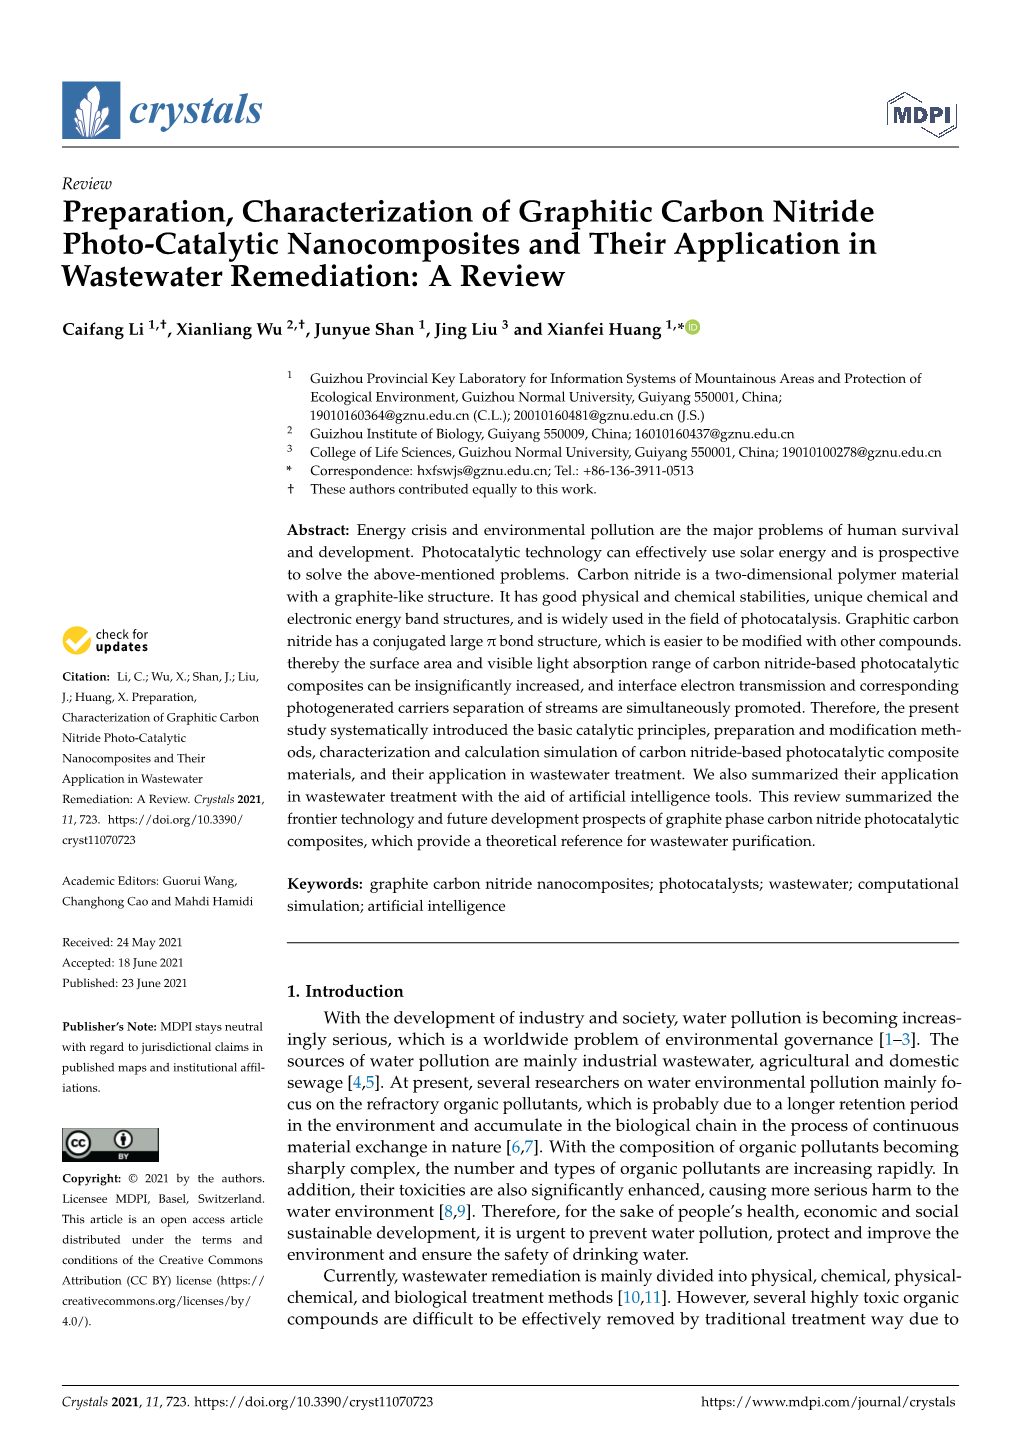 Preparation, Characterization of Graphitic Carbon Nitride Photo-Catalytic Nanocomposites and Their Application in Wastewater Remediation: a Review